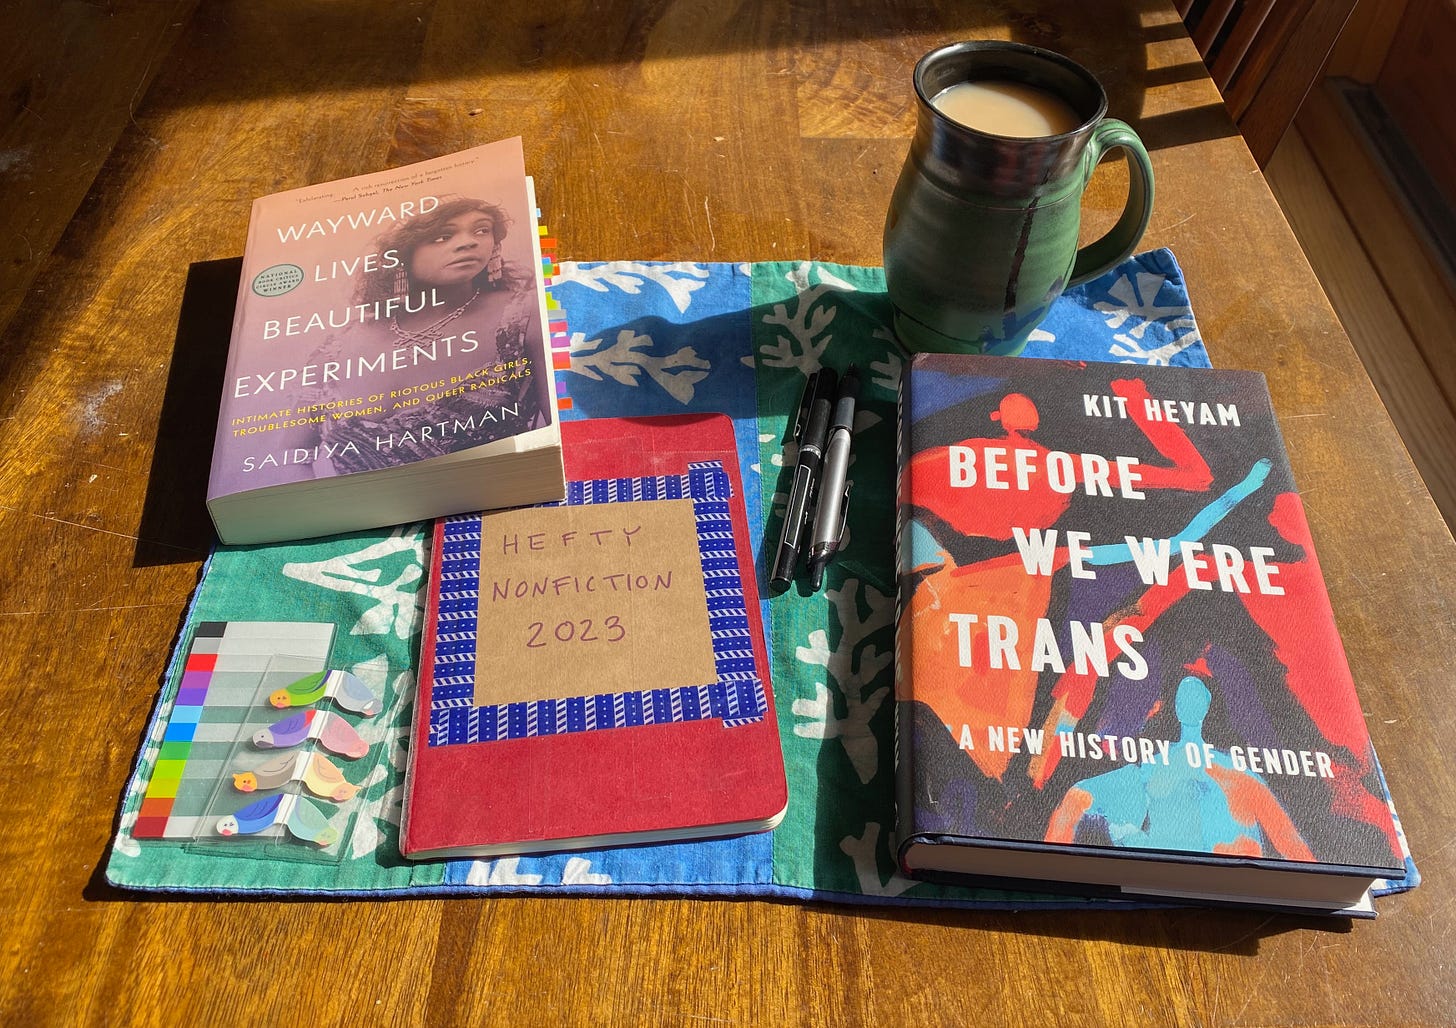 Before We Were Trans & Wayward Lives, Beautiful Experiments sit on a colorful placemat next to a red notebook titled 'Hefty Nonfiction 2023', a few pens, a pack of colorful tabs, and and a mug of tea.